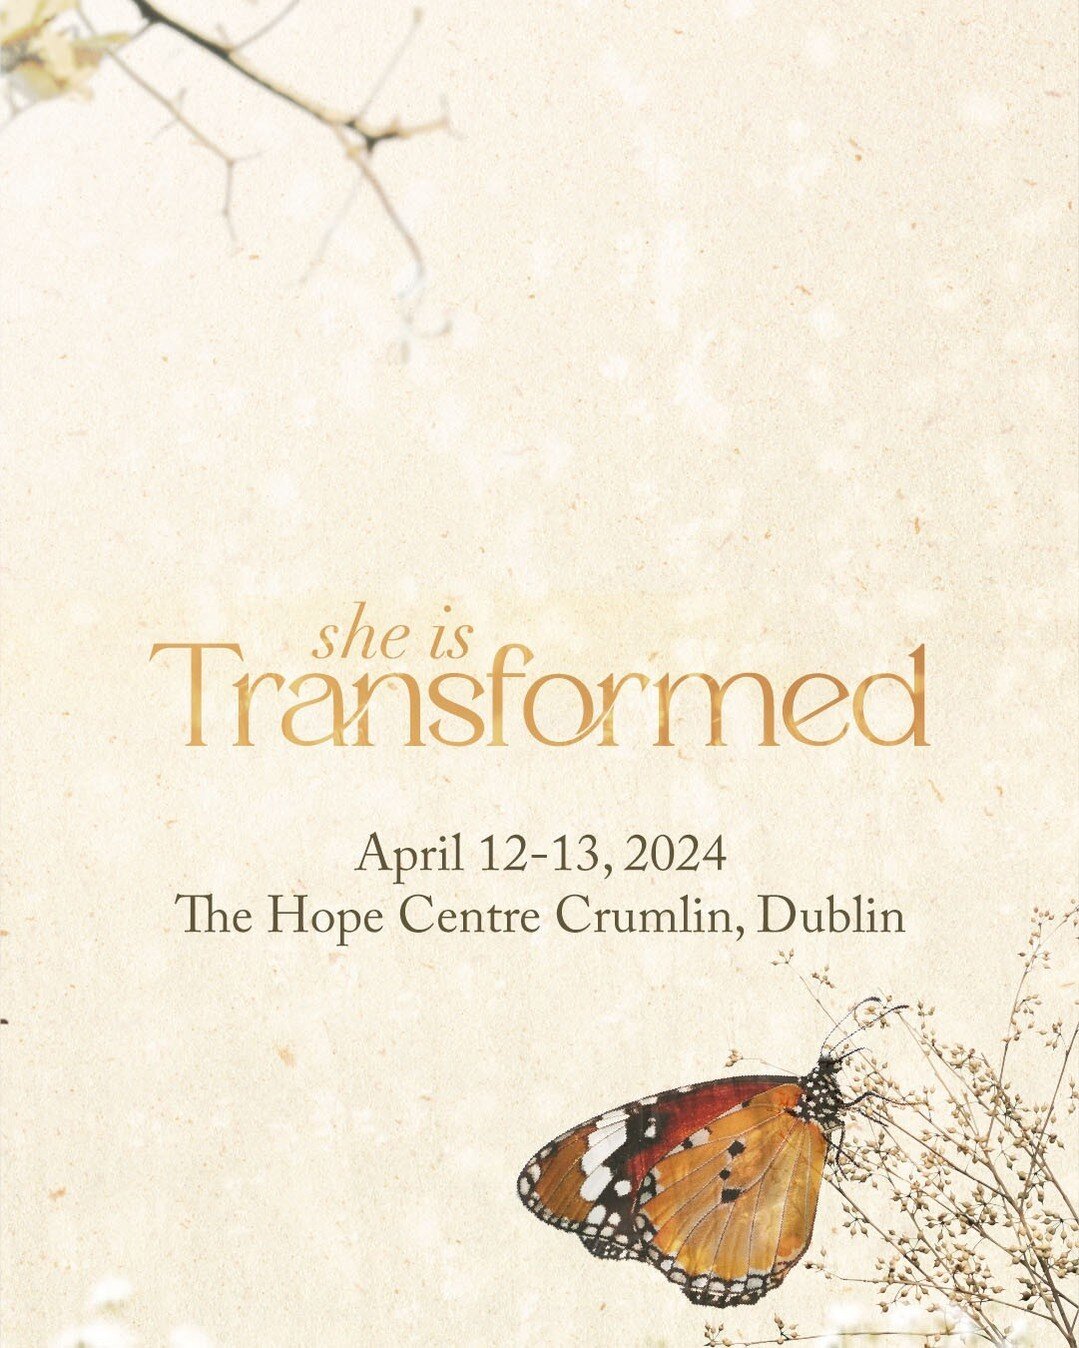 Friends, we are so excited to be back in IRELAND in just a few weeks to partner with The Hope Centre in Crumlin, Dublin. We have a team of ladies who will be going over to serve alongside of our Irish sisters to host She Is Transformed!  If you have 